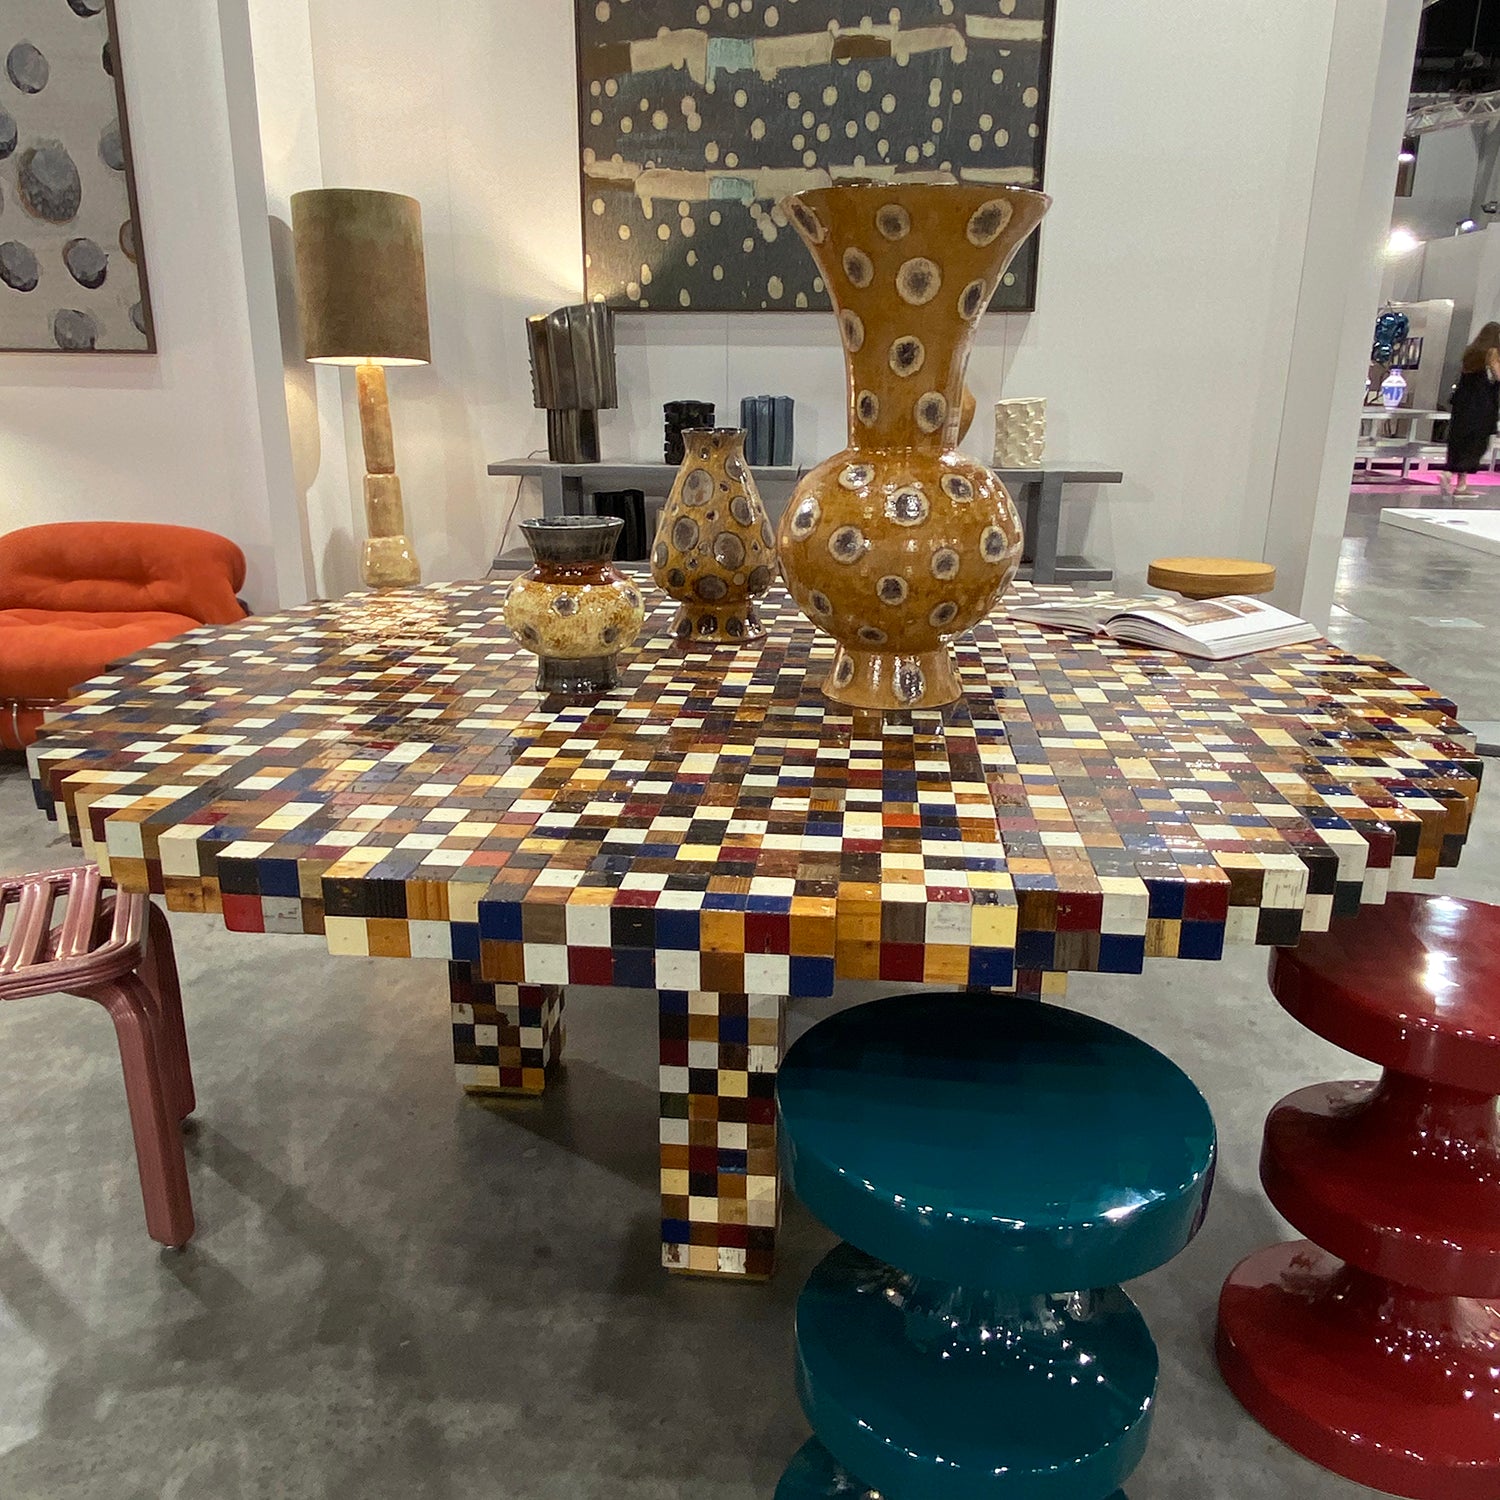 Safari Journal / Blog by Safari Fusion | Melbourne Design Fair 2023 | Reclaimed timber table by Piet Hein Eek, Penny Vase by Martyn Thompson and Stools by India Mahdavi